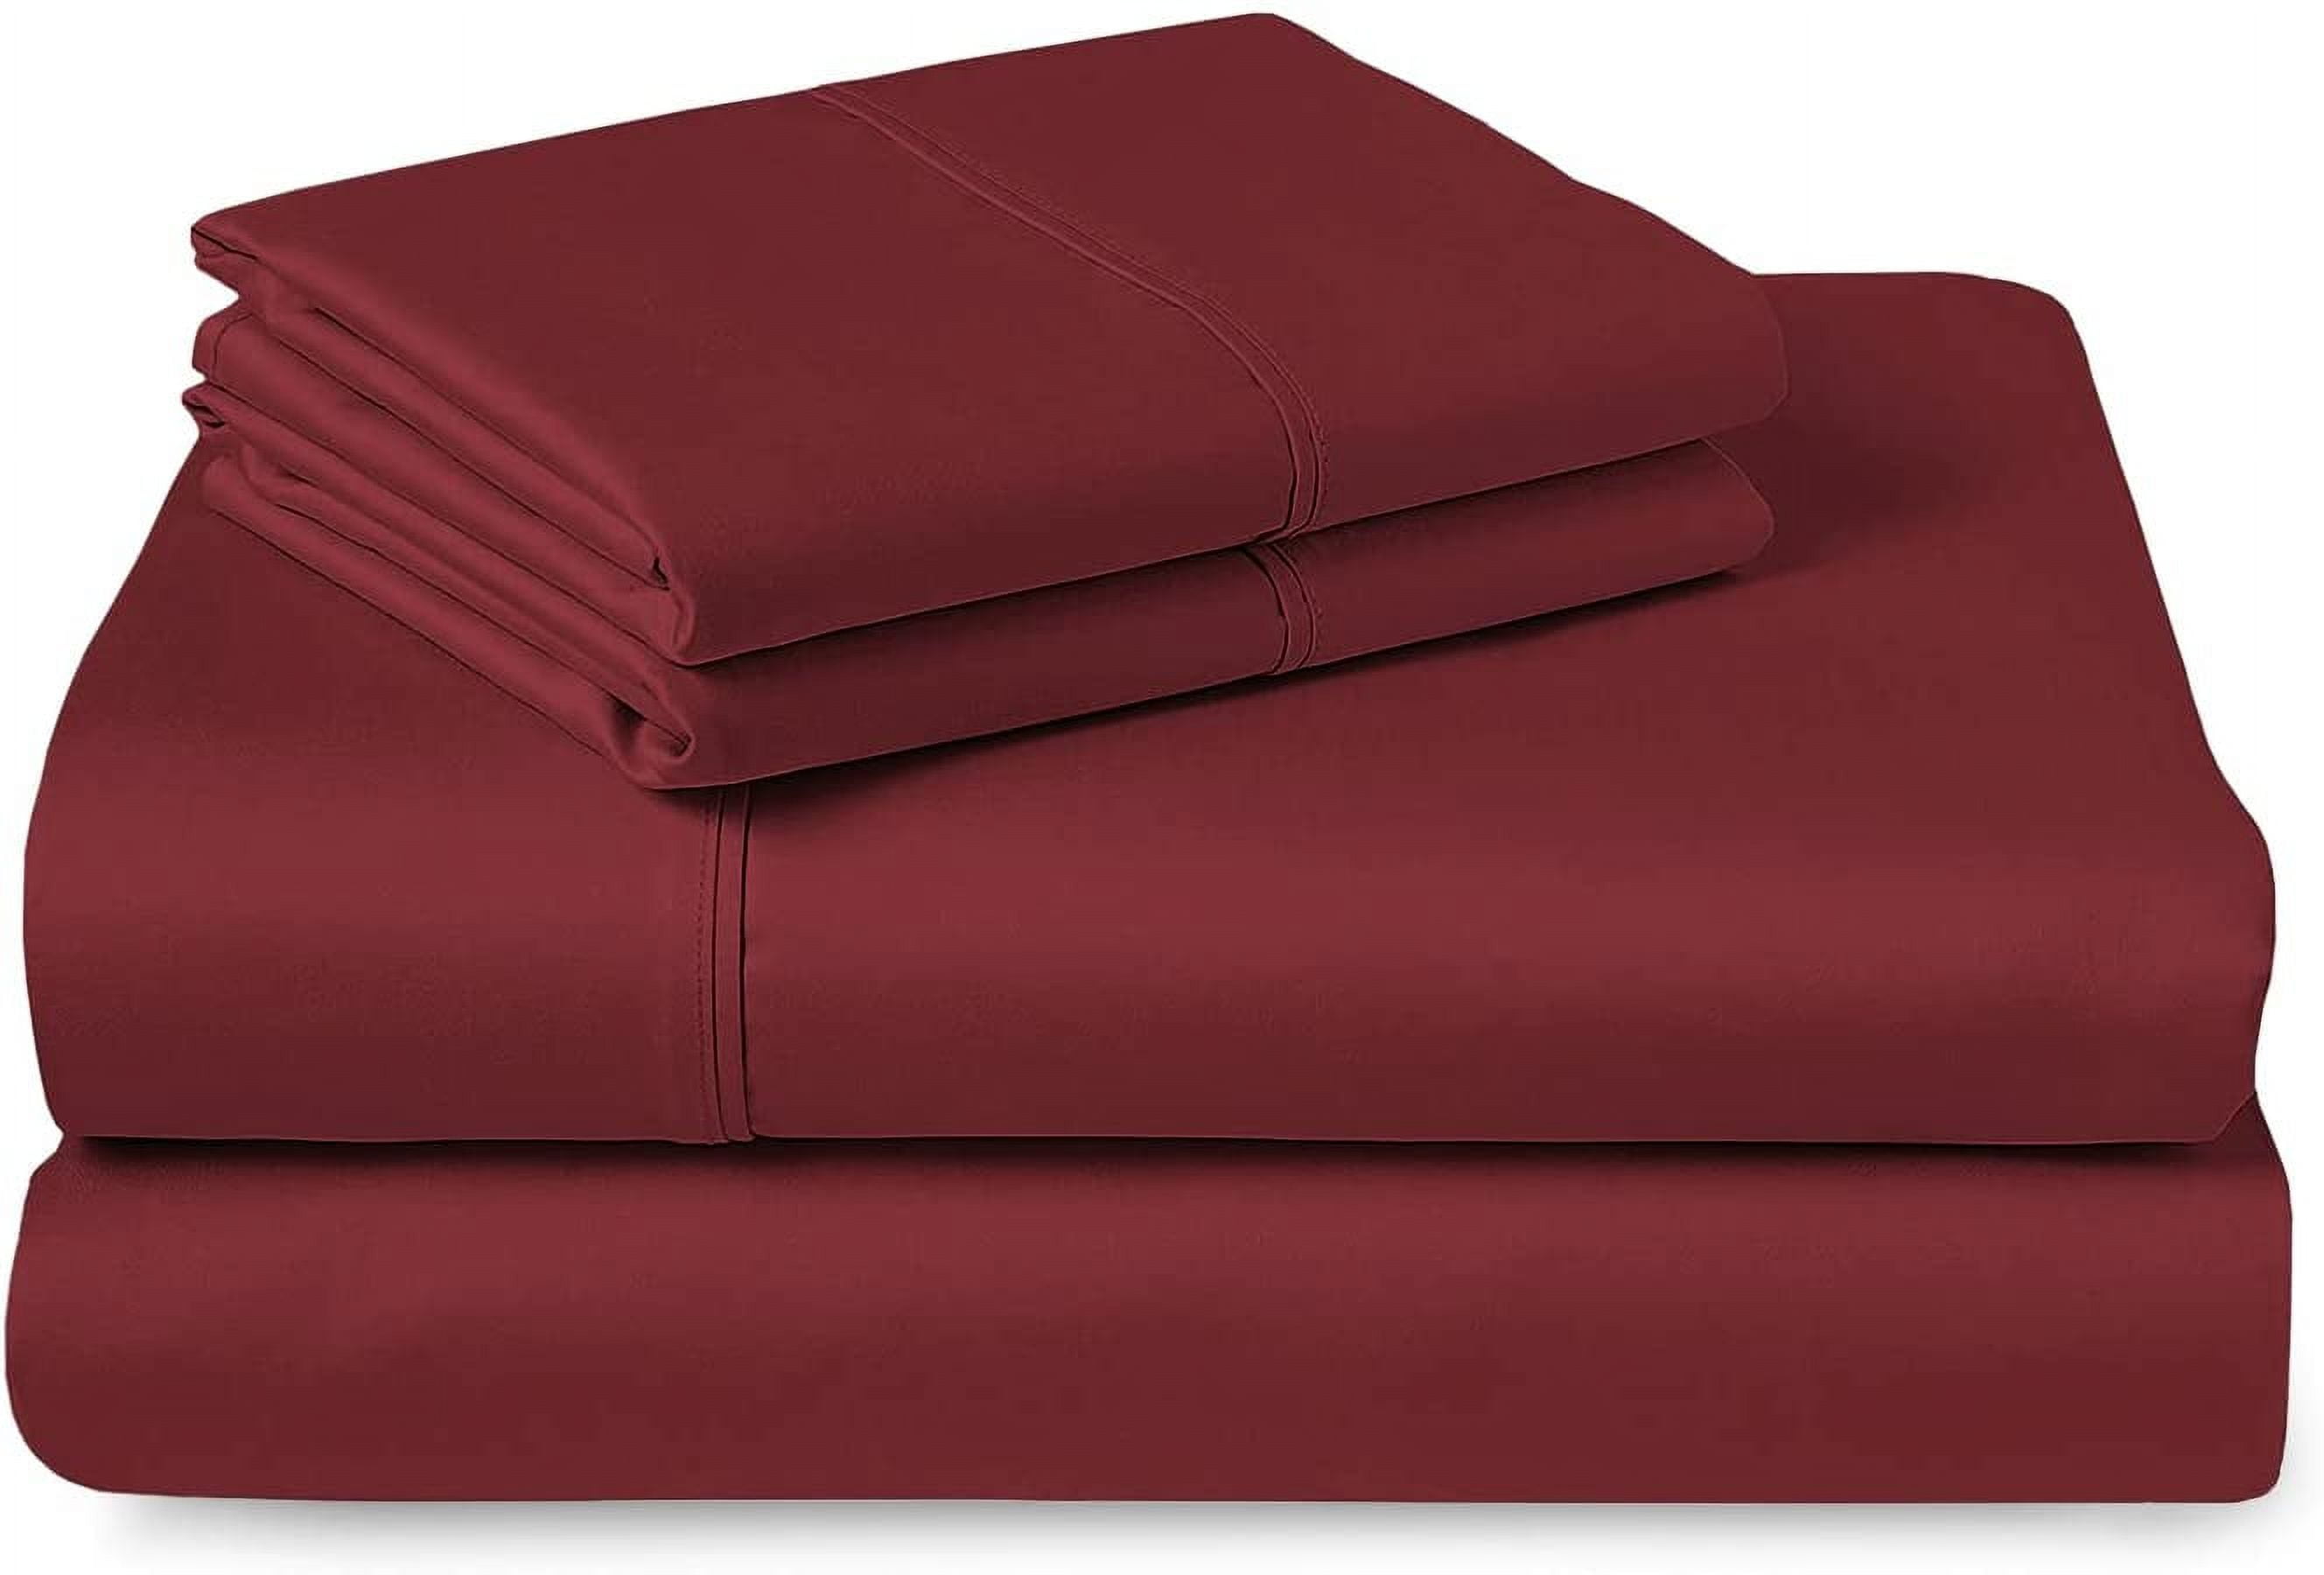 4 Piece Premium Sheet Set-Cotton Bed Sheets Twin Size-100% Cotton-400  Thread Count-16 Inch Deep Pock…See more 4 Piece Premium Sheet Set-Cotton  Bed